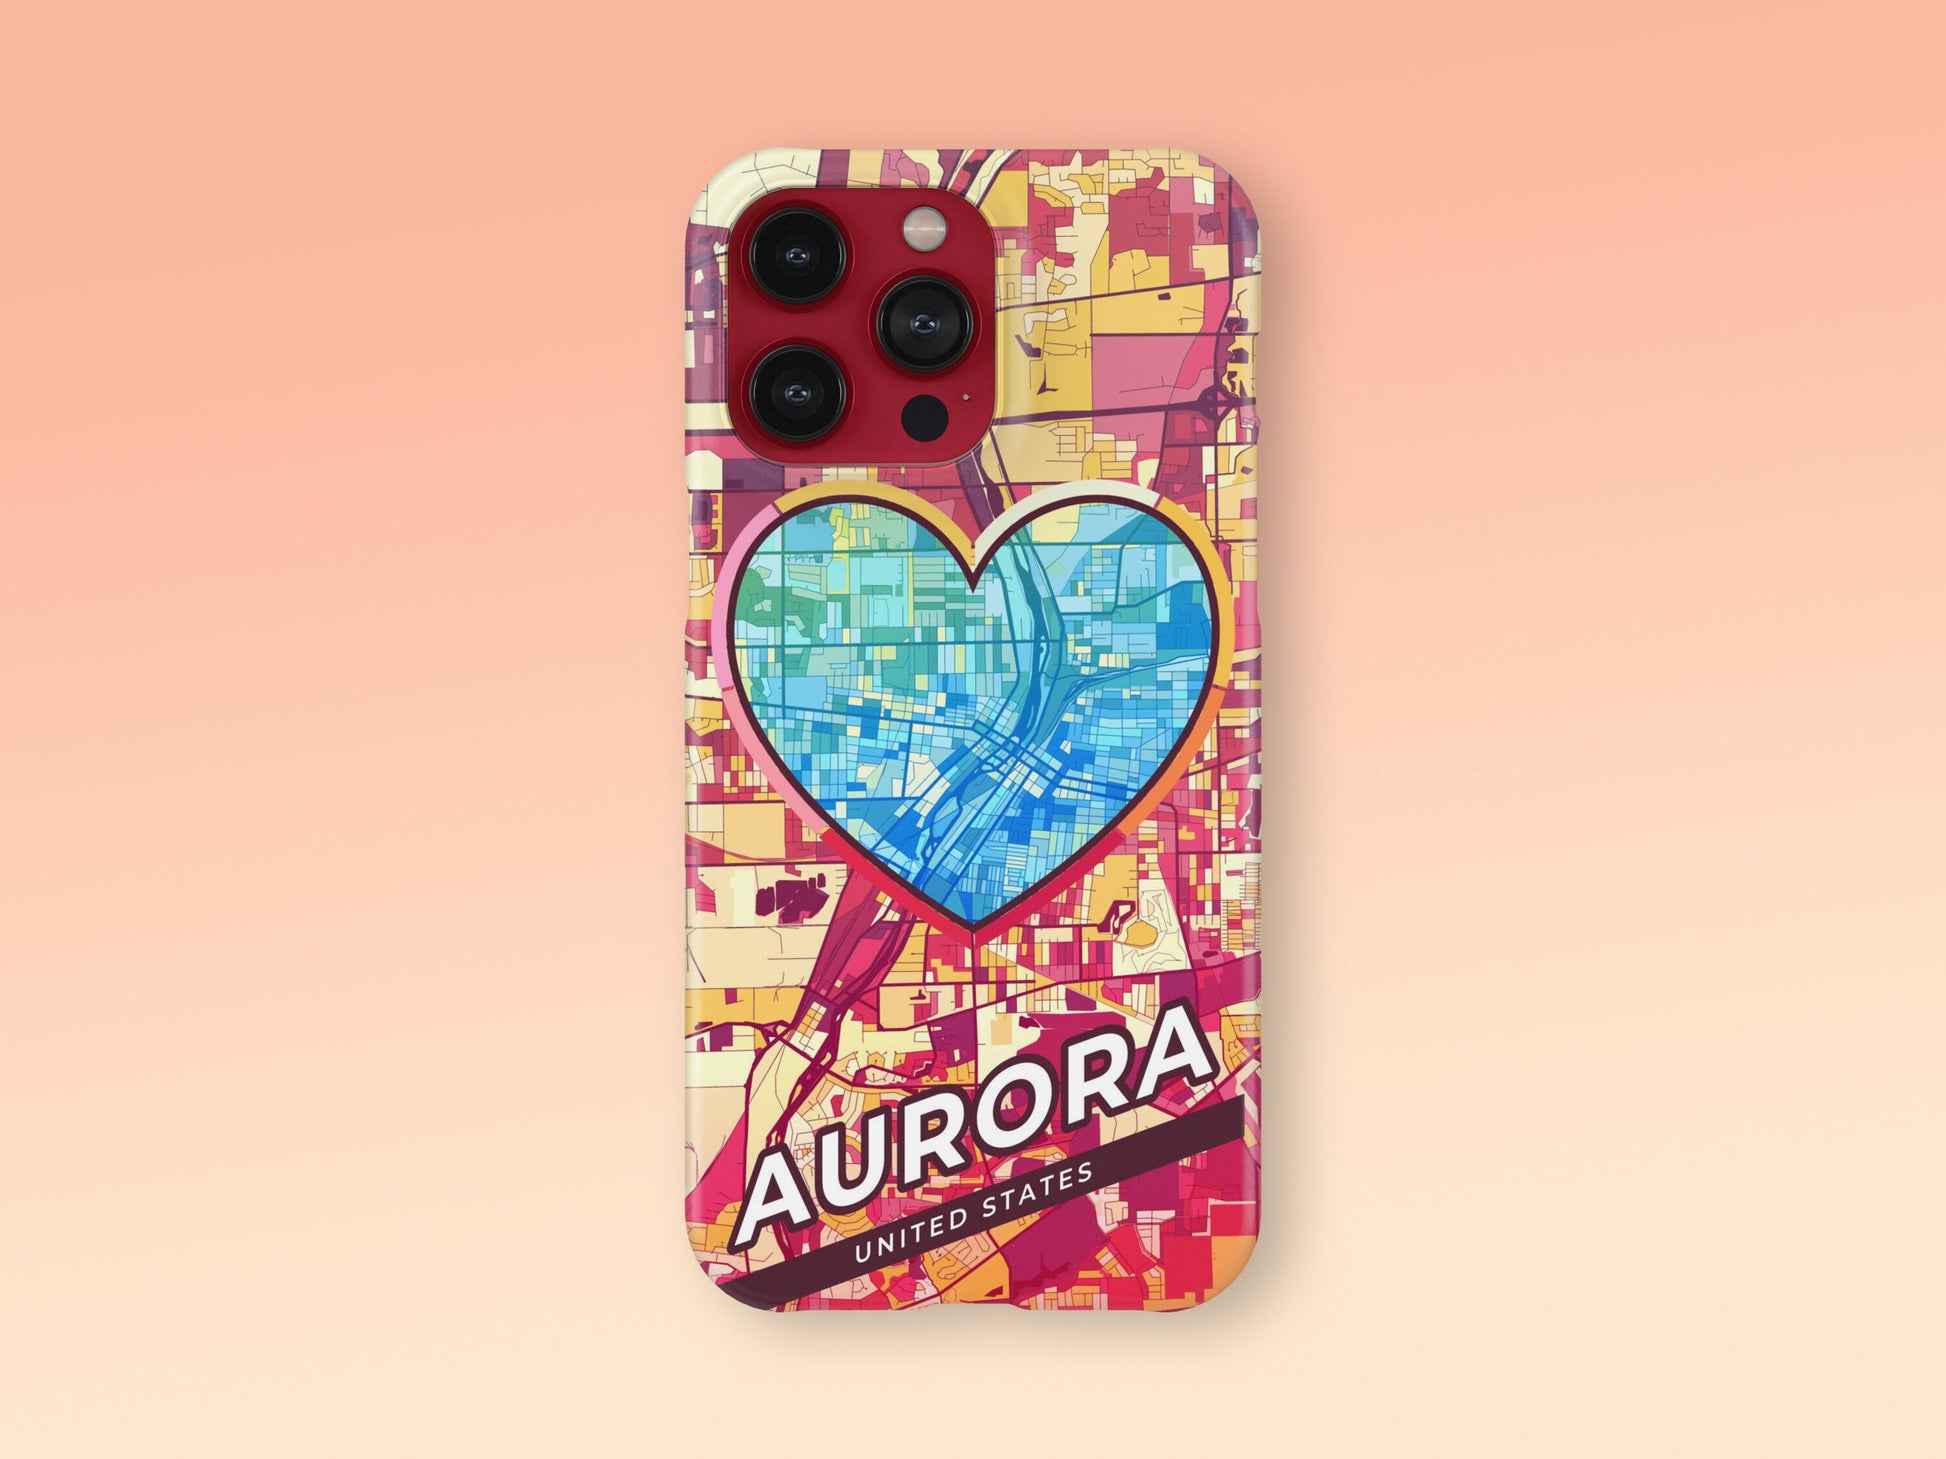 Aurora Illinois slim phone case with colorful icon. Birthday, wedding or housewarming gift. Couple match cases. 2